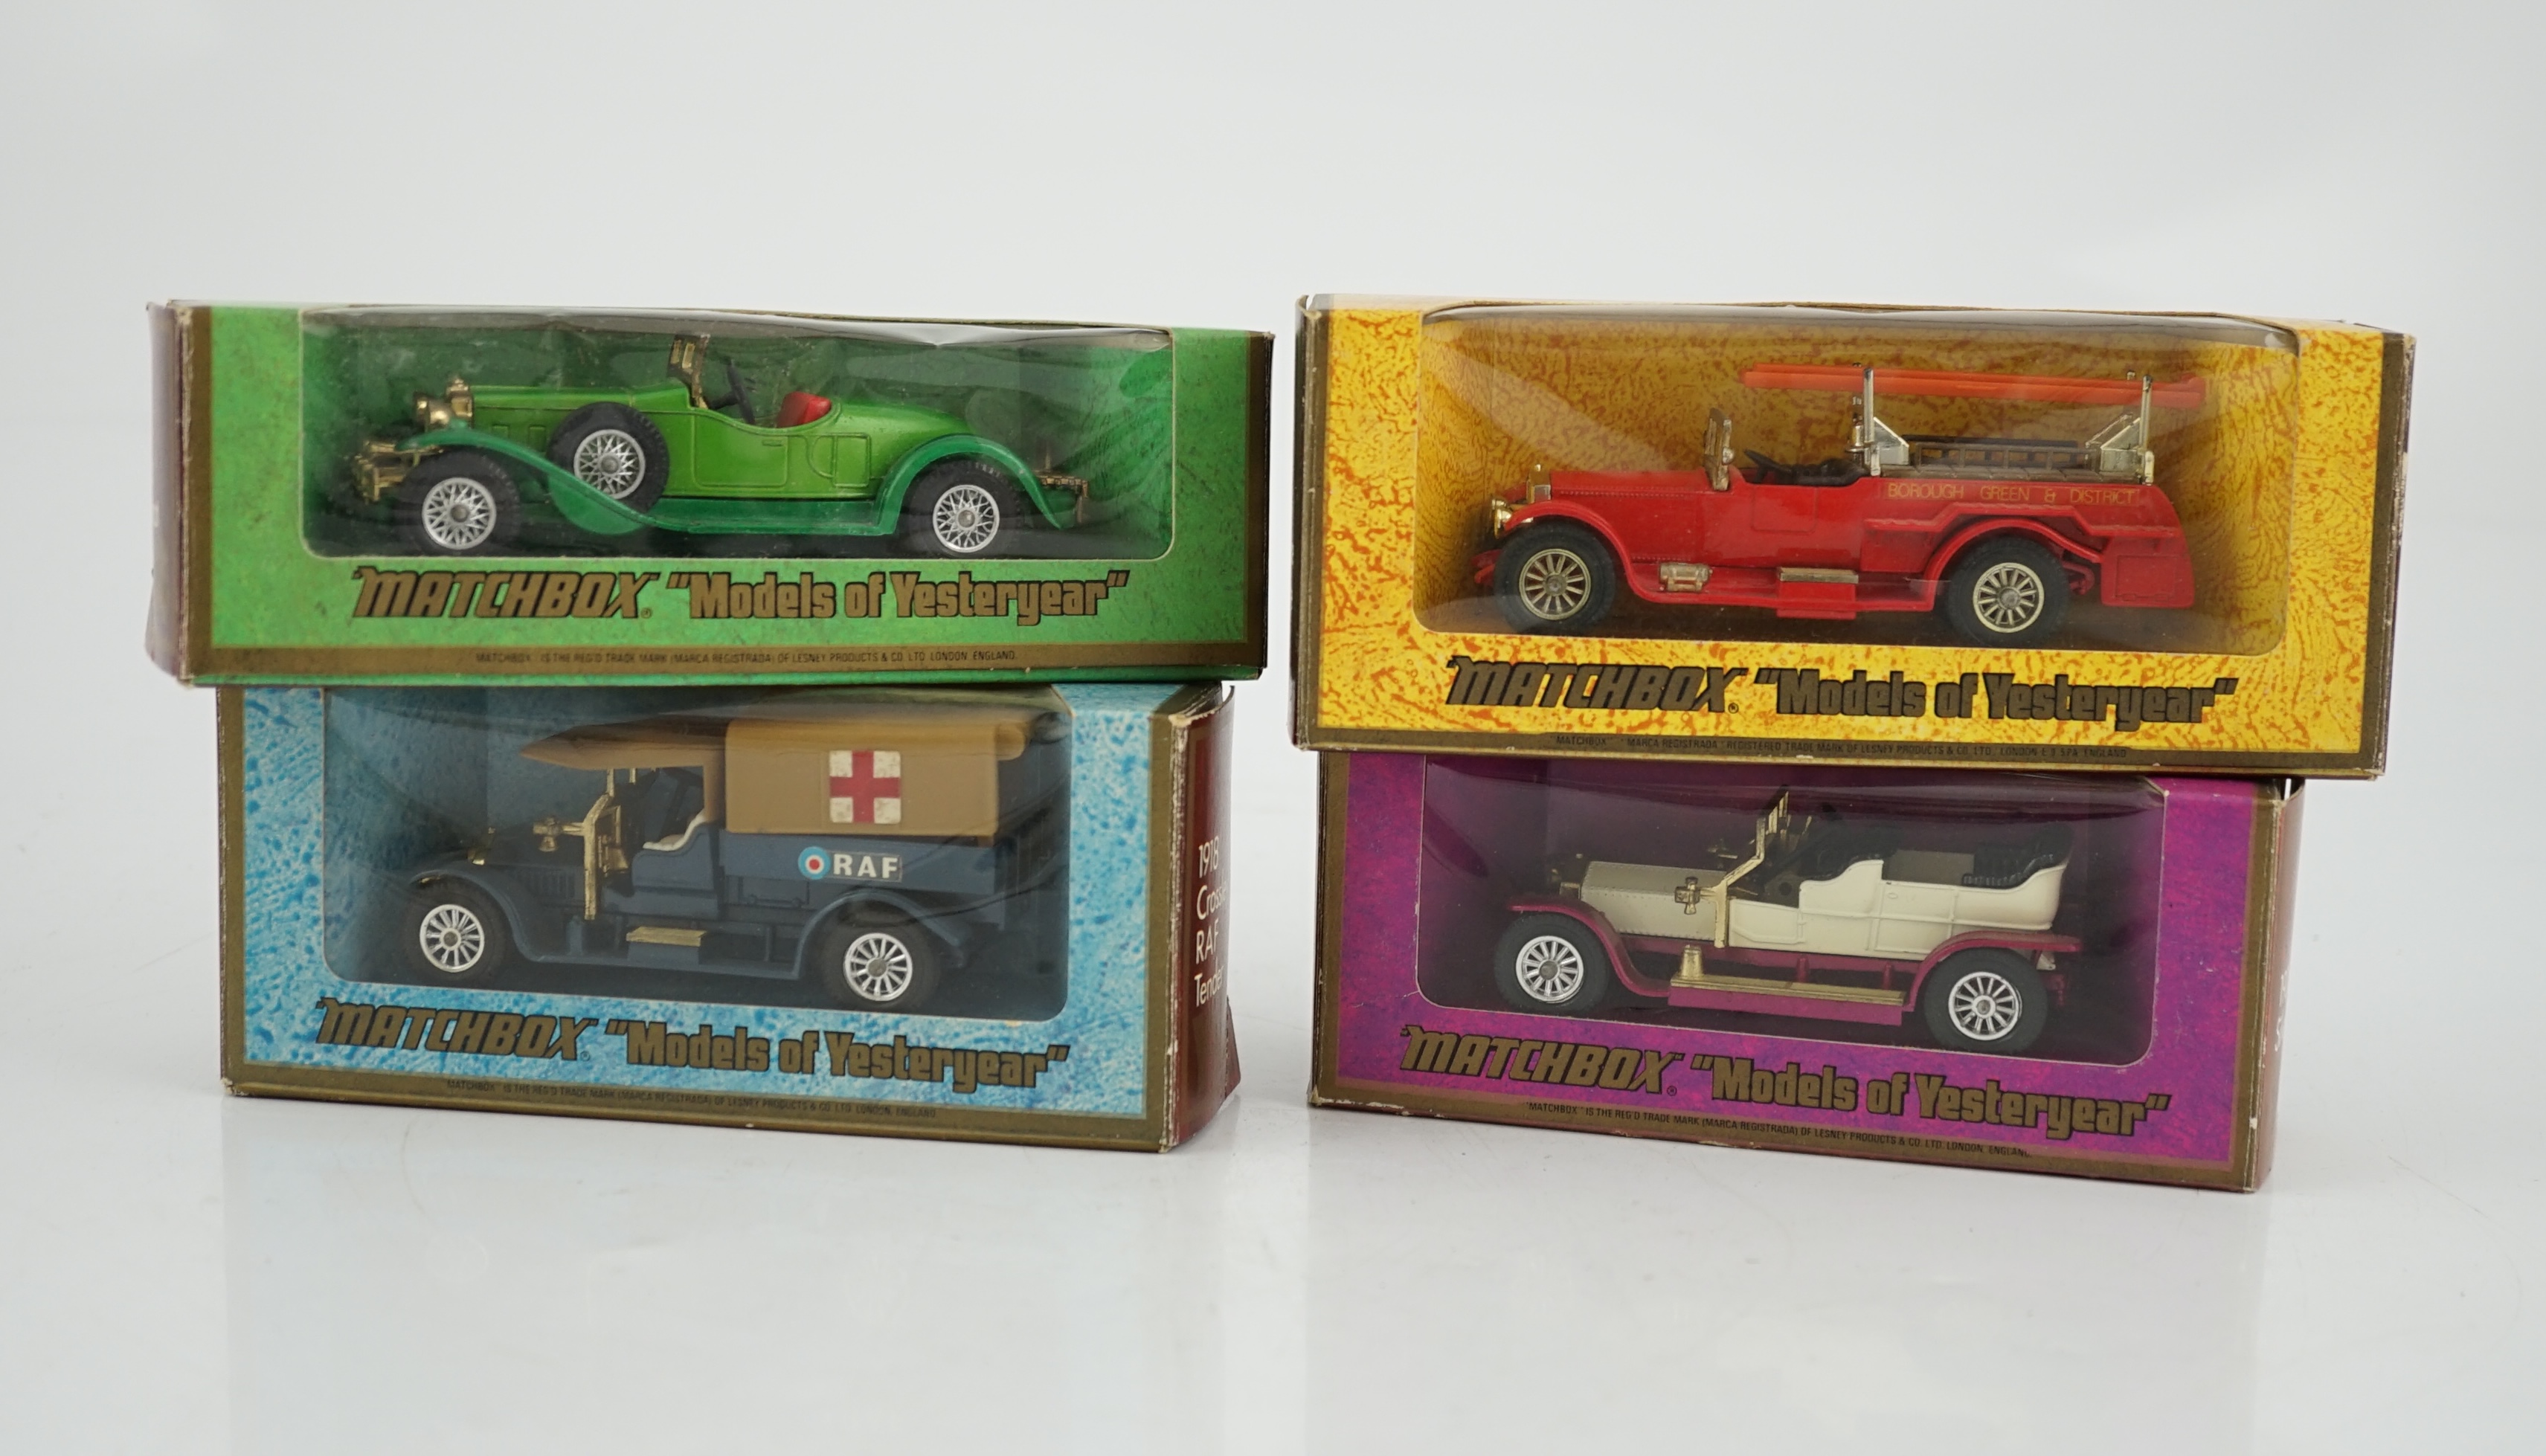 Seventy-nine Matchbox Models of Yesteryear in mainly woodgrain, cream and maroon era boxes, - Image 5 of 8